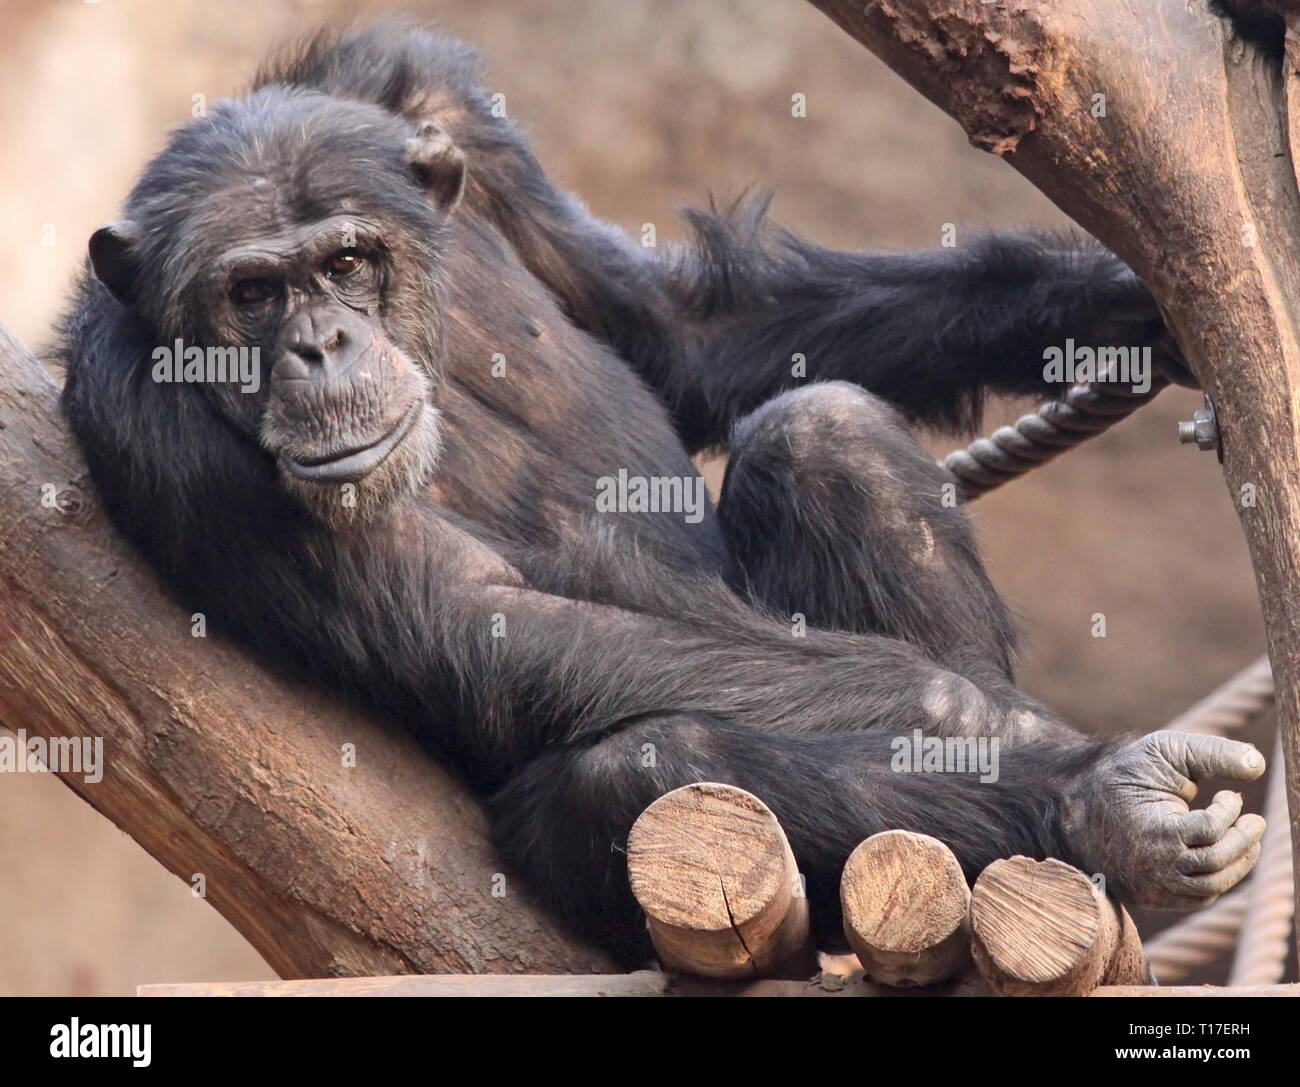 Close up of an old Chimpanzee Stock Photo